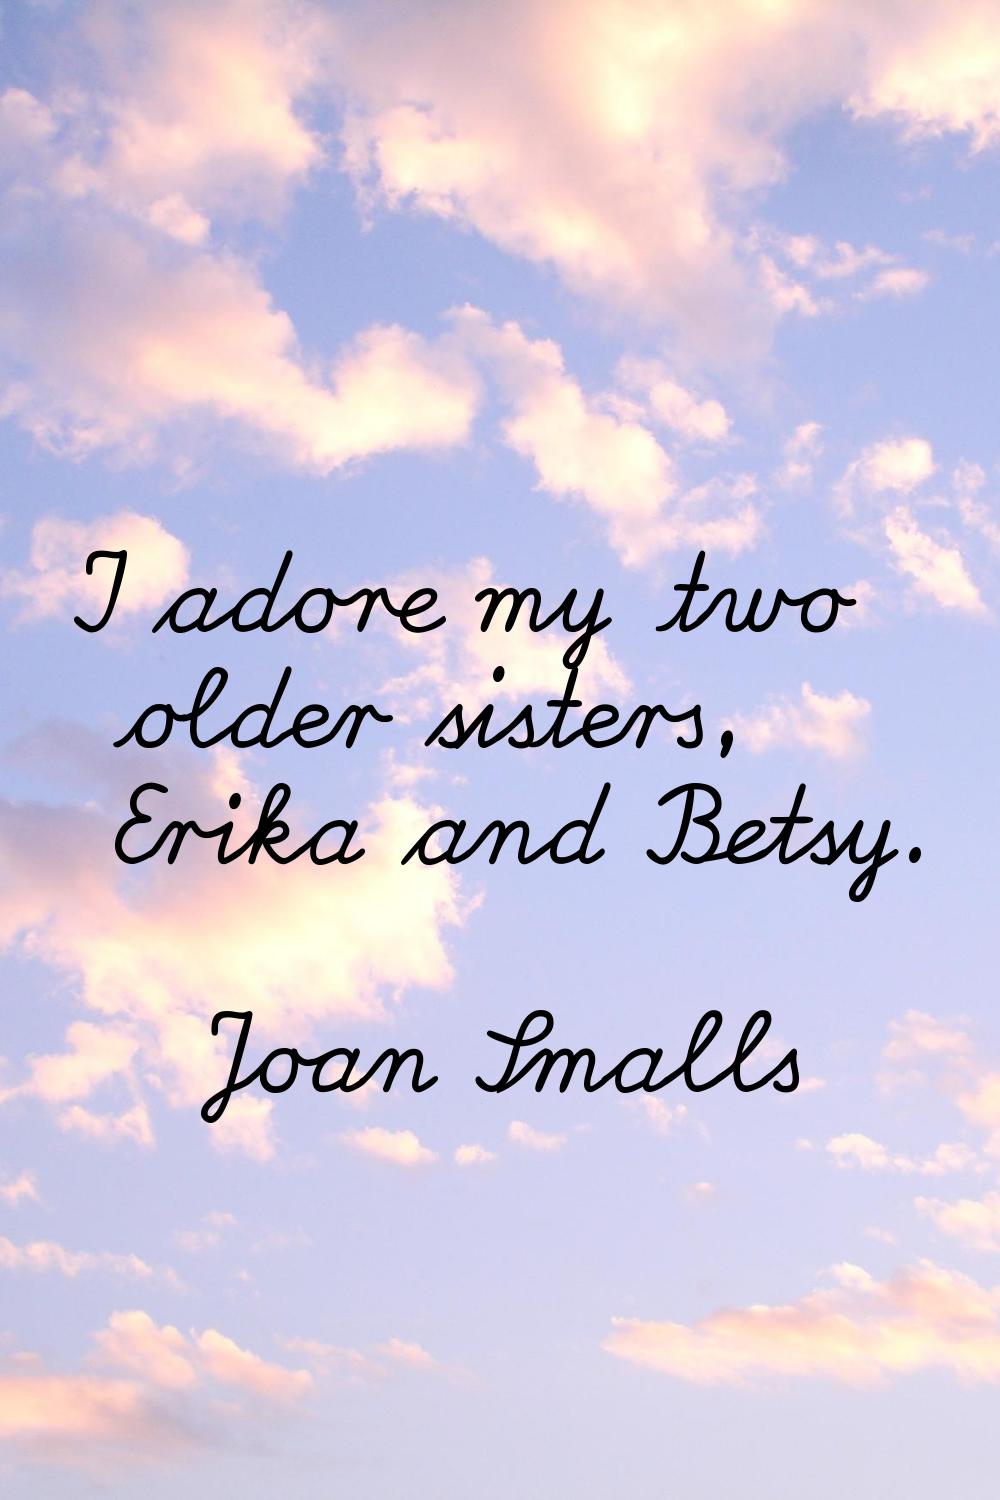 I adore my two older sisters, Erika and Betsy.